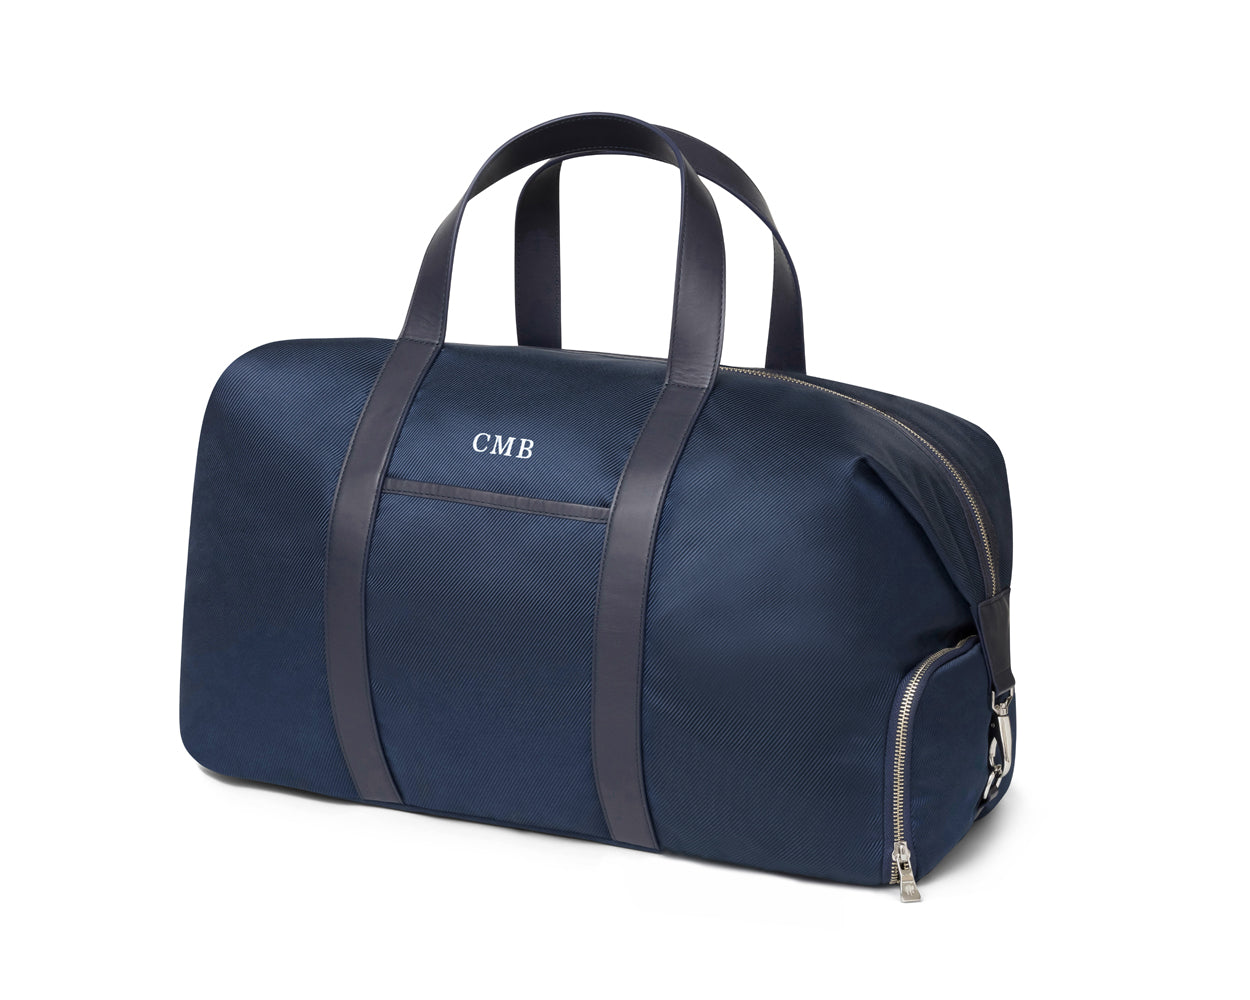 The Byers Duffel Bag: Navy Ballistic with White Embroidered Lettering